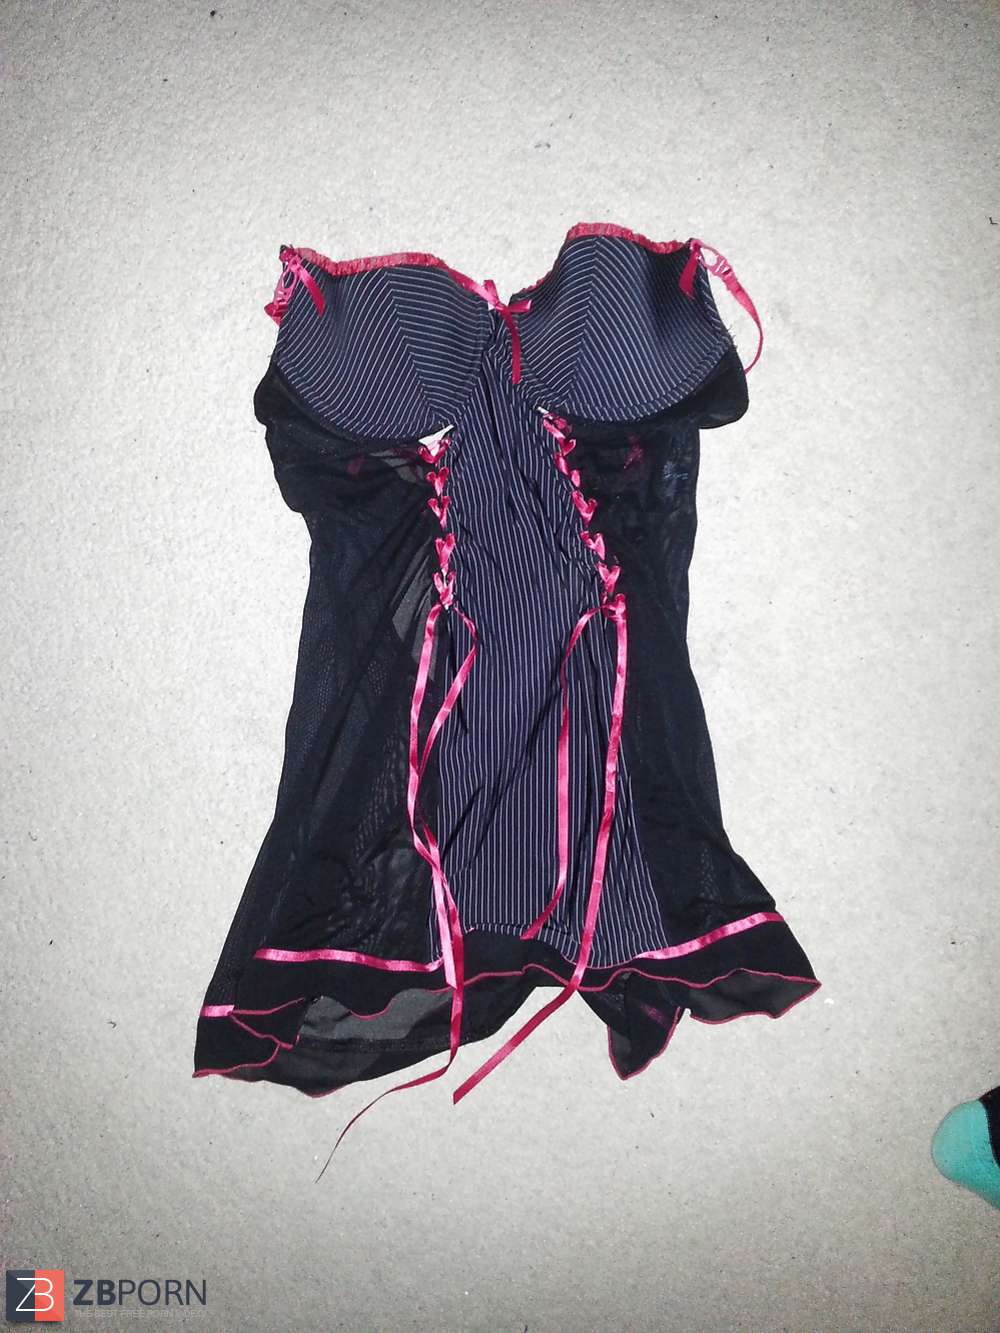 Step Daughters Fresh Lingerie Zb Porn